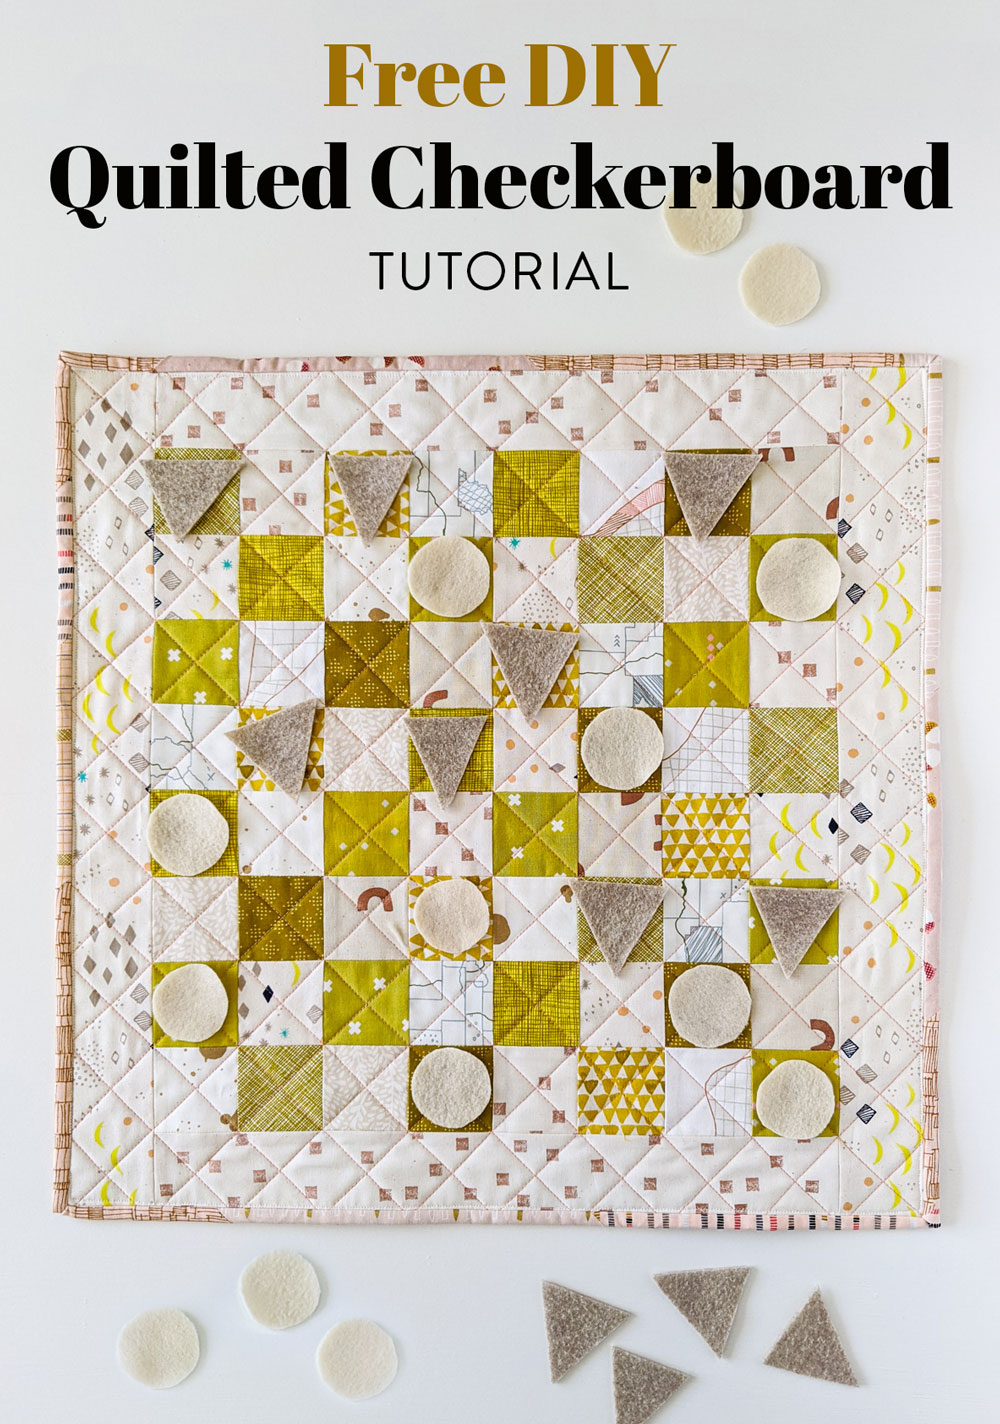 10 gift tutorials for Teacher Appreciation that you can make in a weekend! Show the teacher in your life you care with a handmade gift. suzyquilts.com #sewingDIY #Quilting